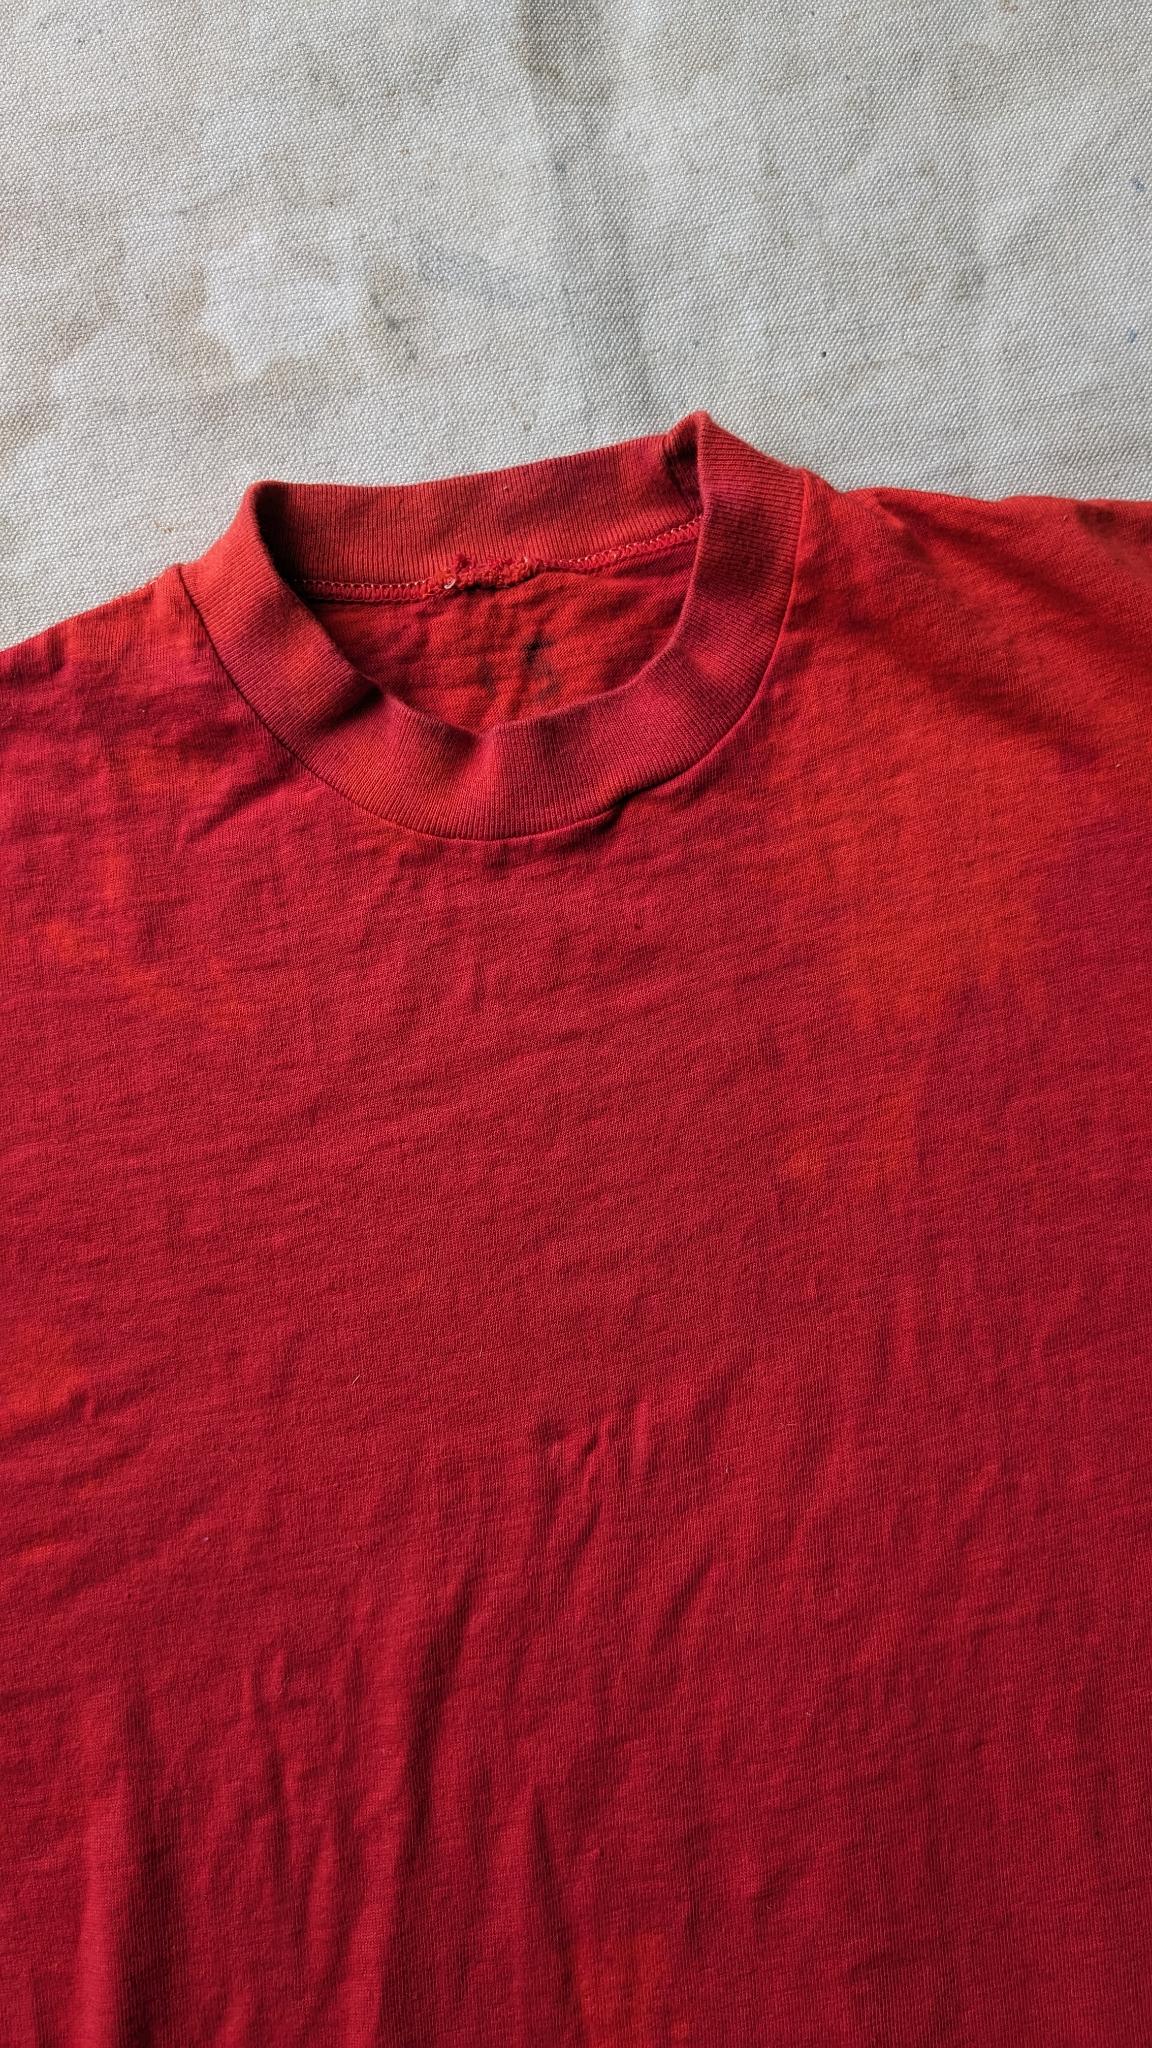 All cotton red tee